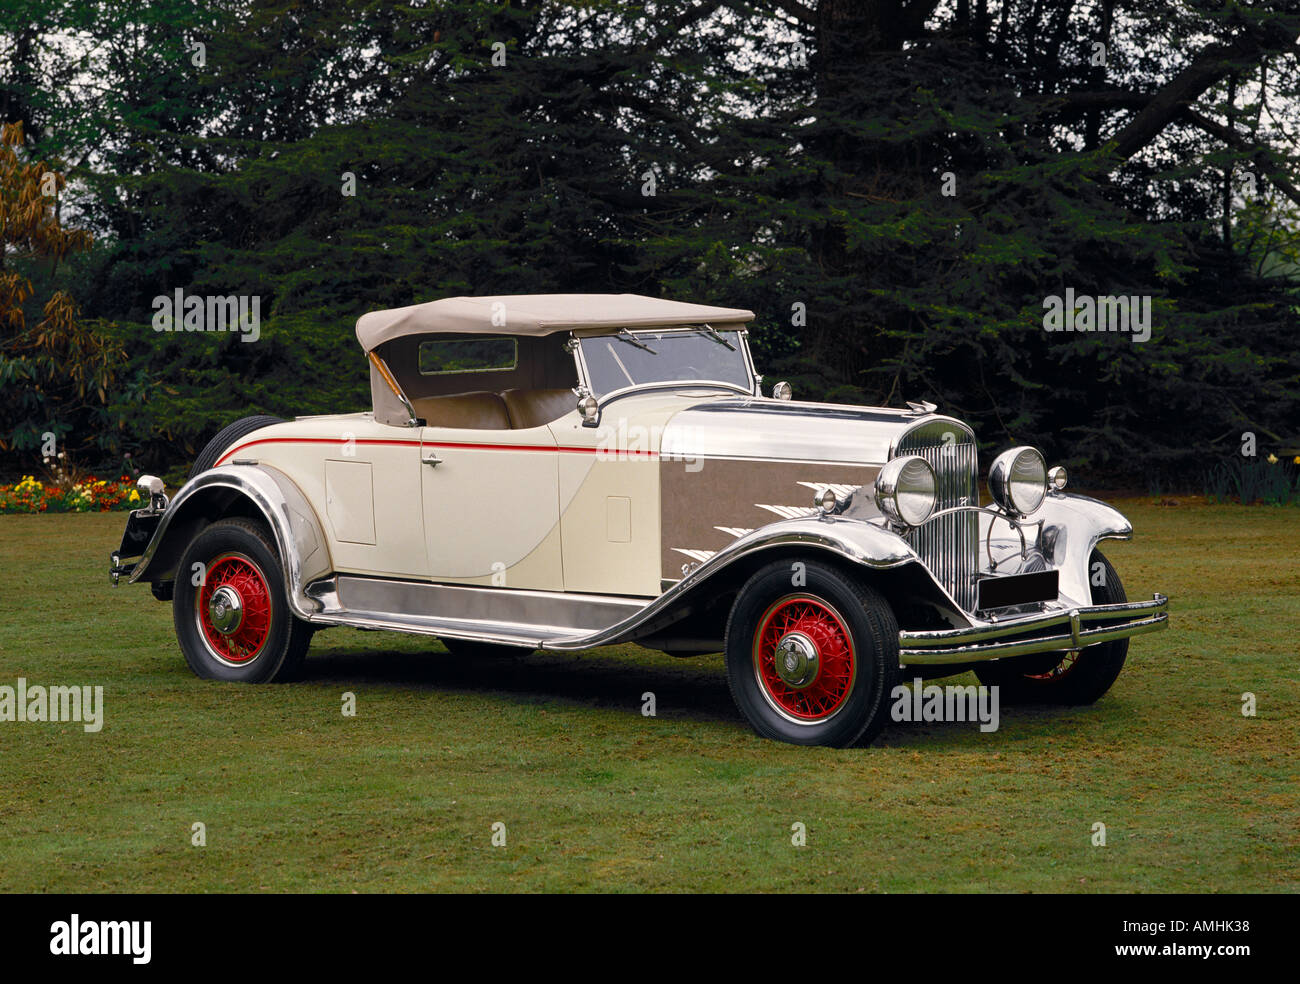 1928 Chrysler 65 drophead coupe Country of origin United States Stock Photo